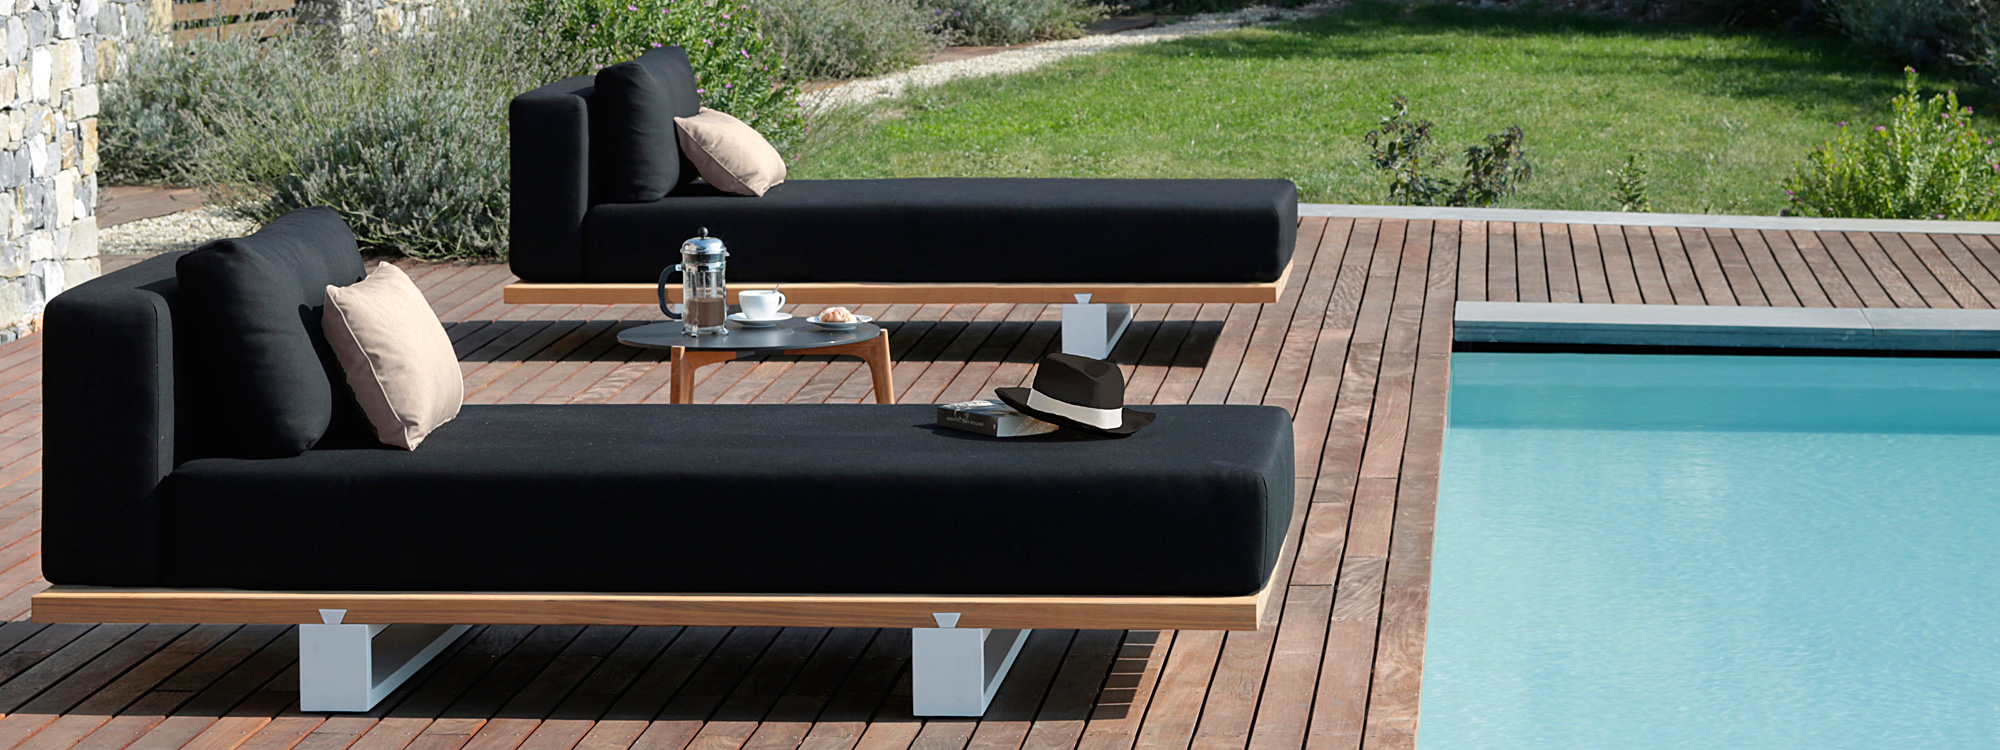 Image of pair of Vigor Lounge daybeds by Royal Botania around poolside